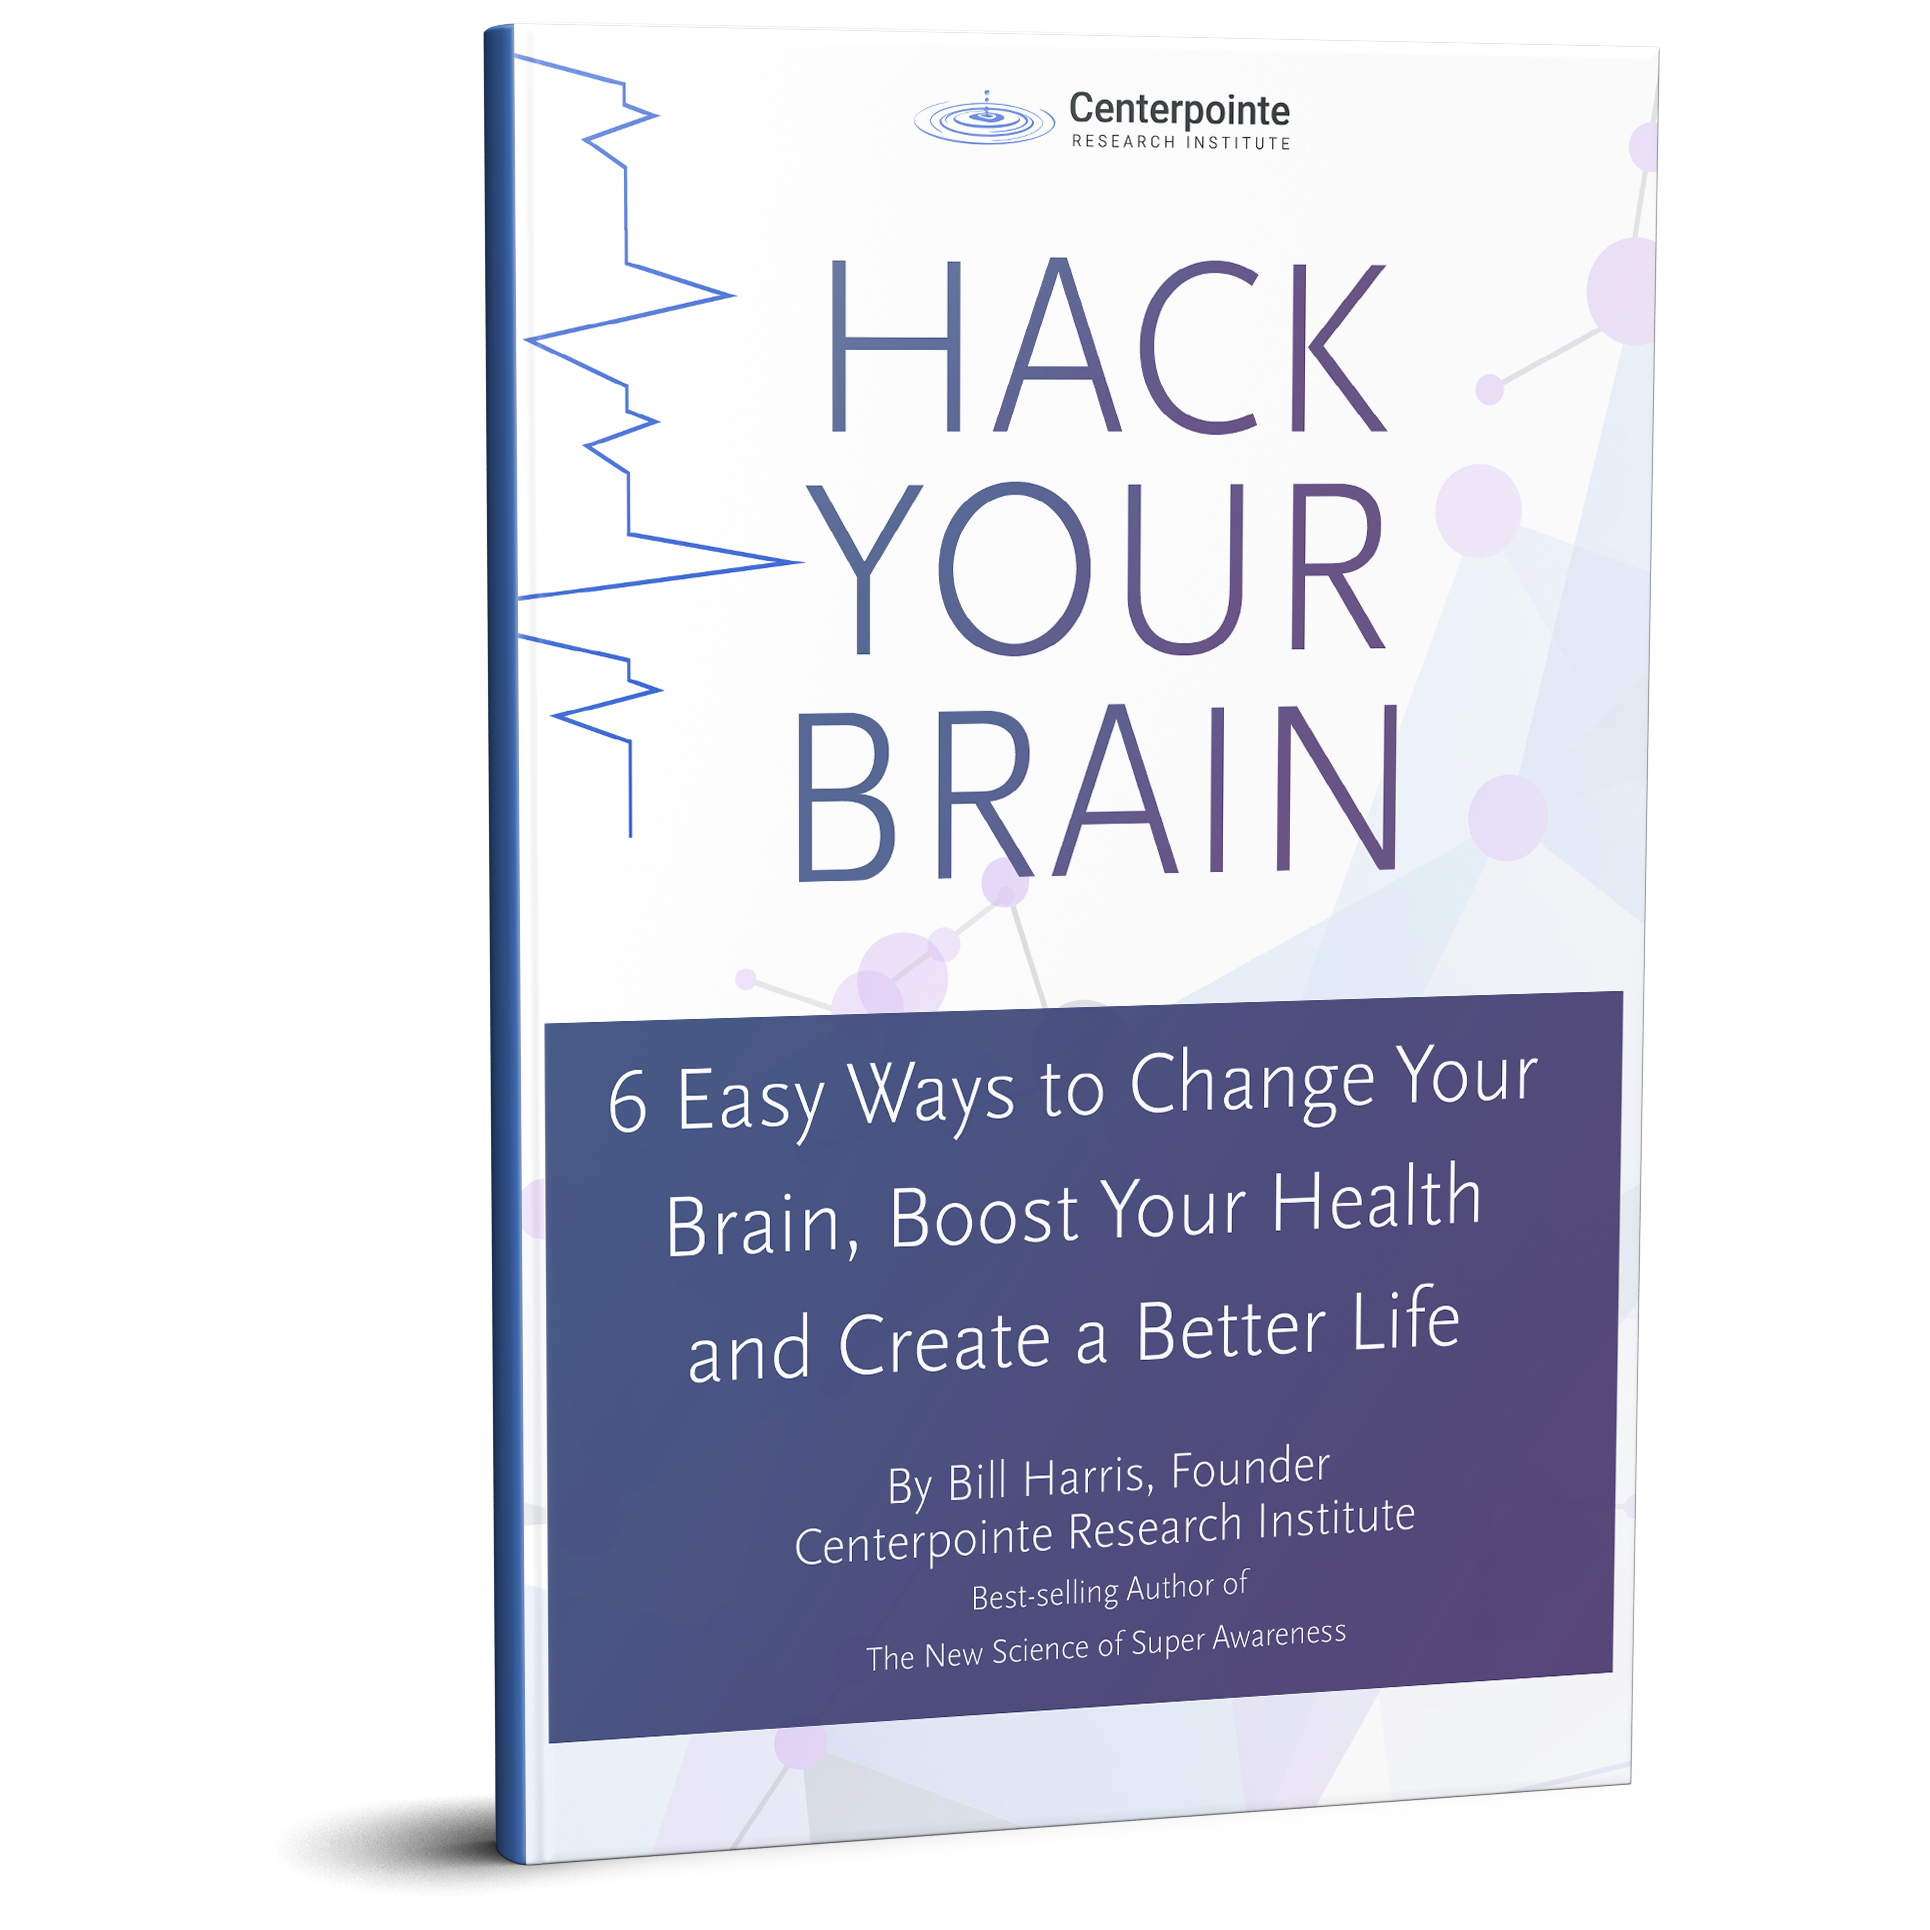 Hack Your Brain 6 Easy Ways to Change Your Brain Boost Your Health and Create a Better Life | Centerpointe Research Institute